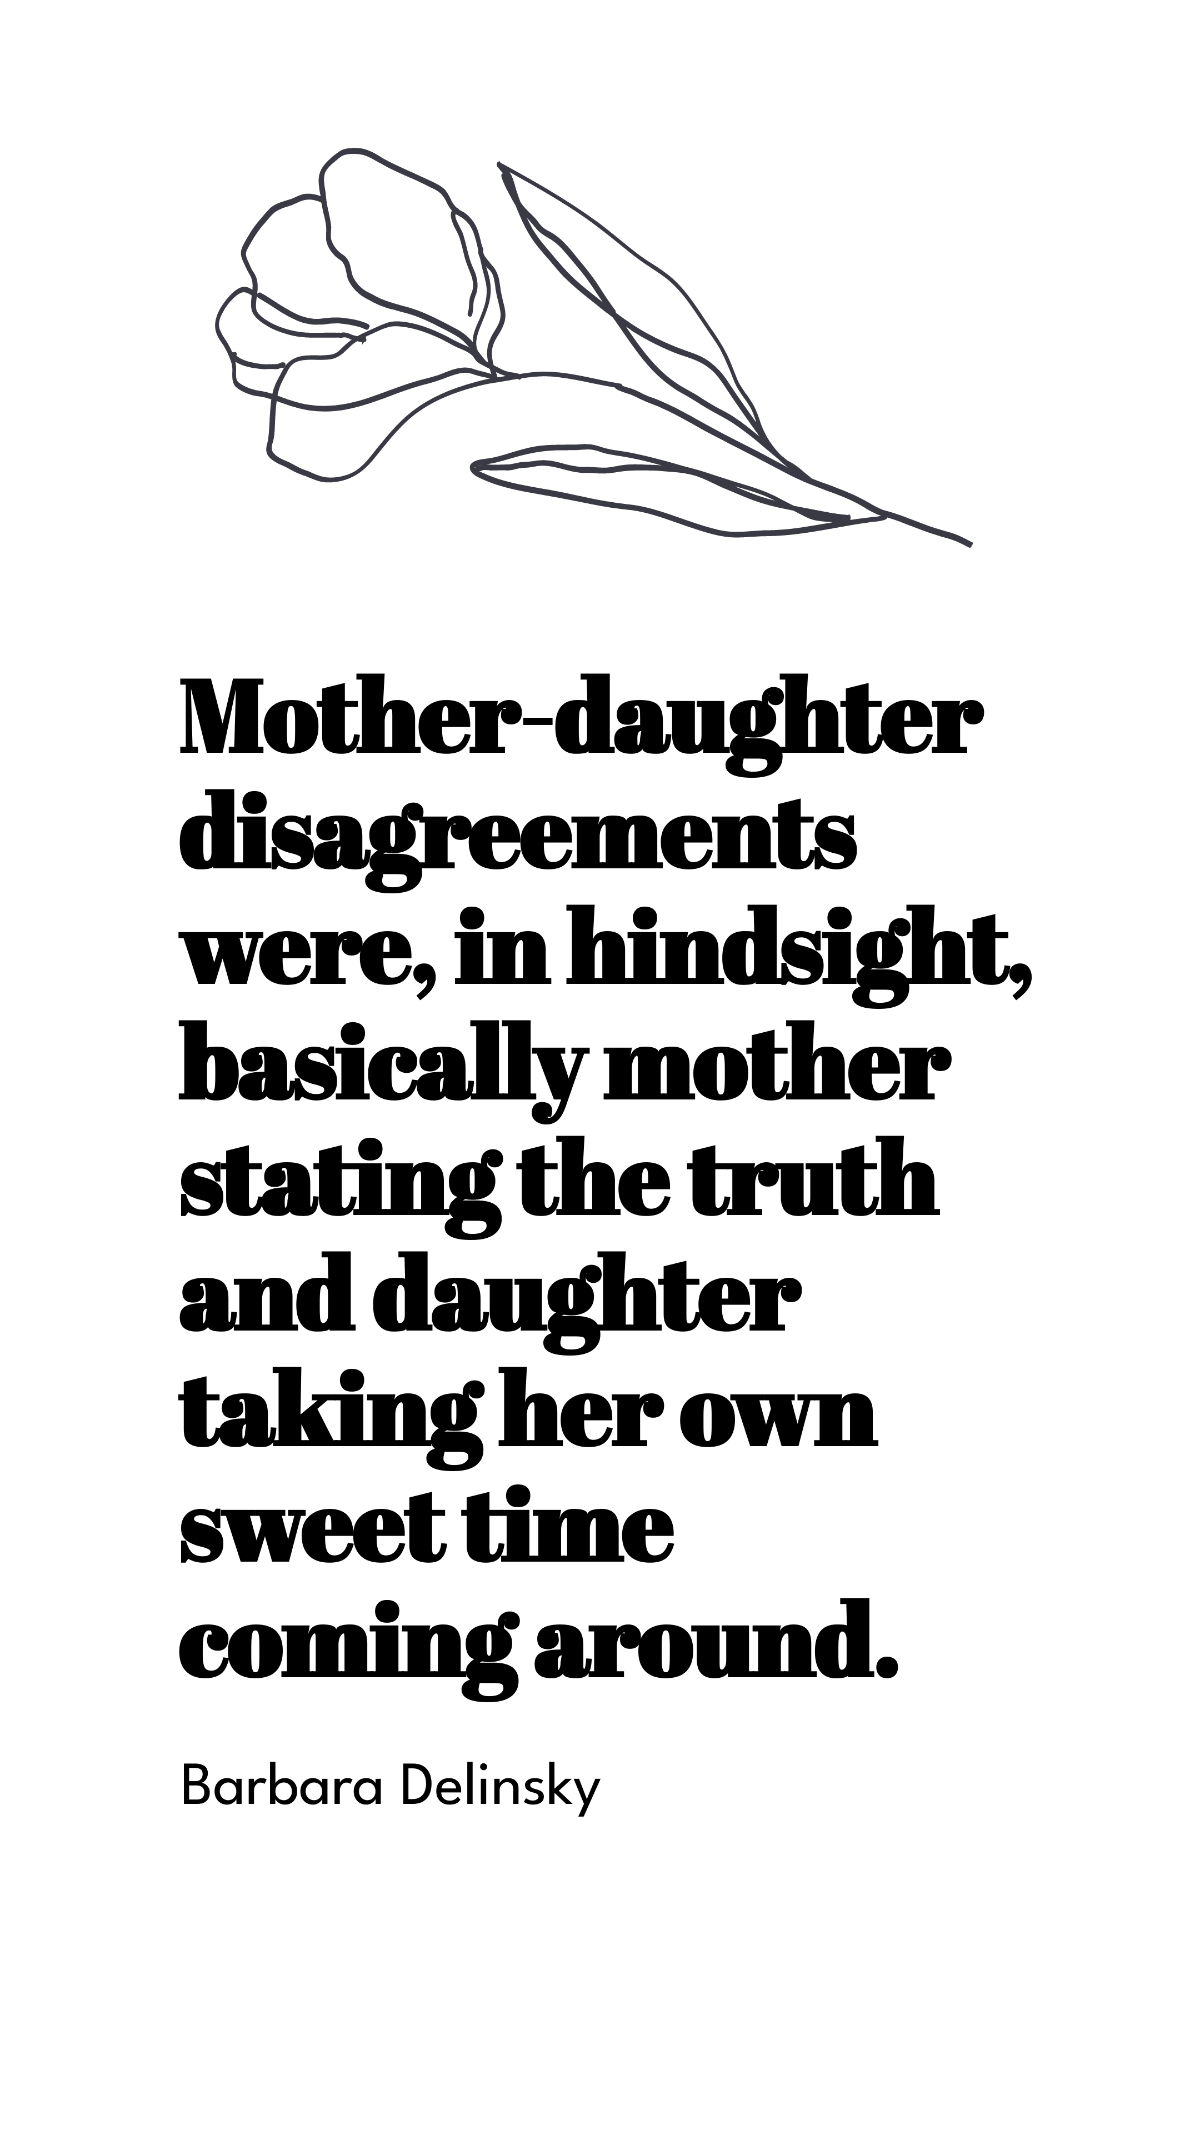 Barbara Delinsky - Mother-daughter disagreements were, in hindsight, basically mother stating the truth and daughter taking her own sweet time coming around.